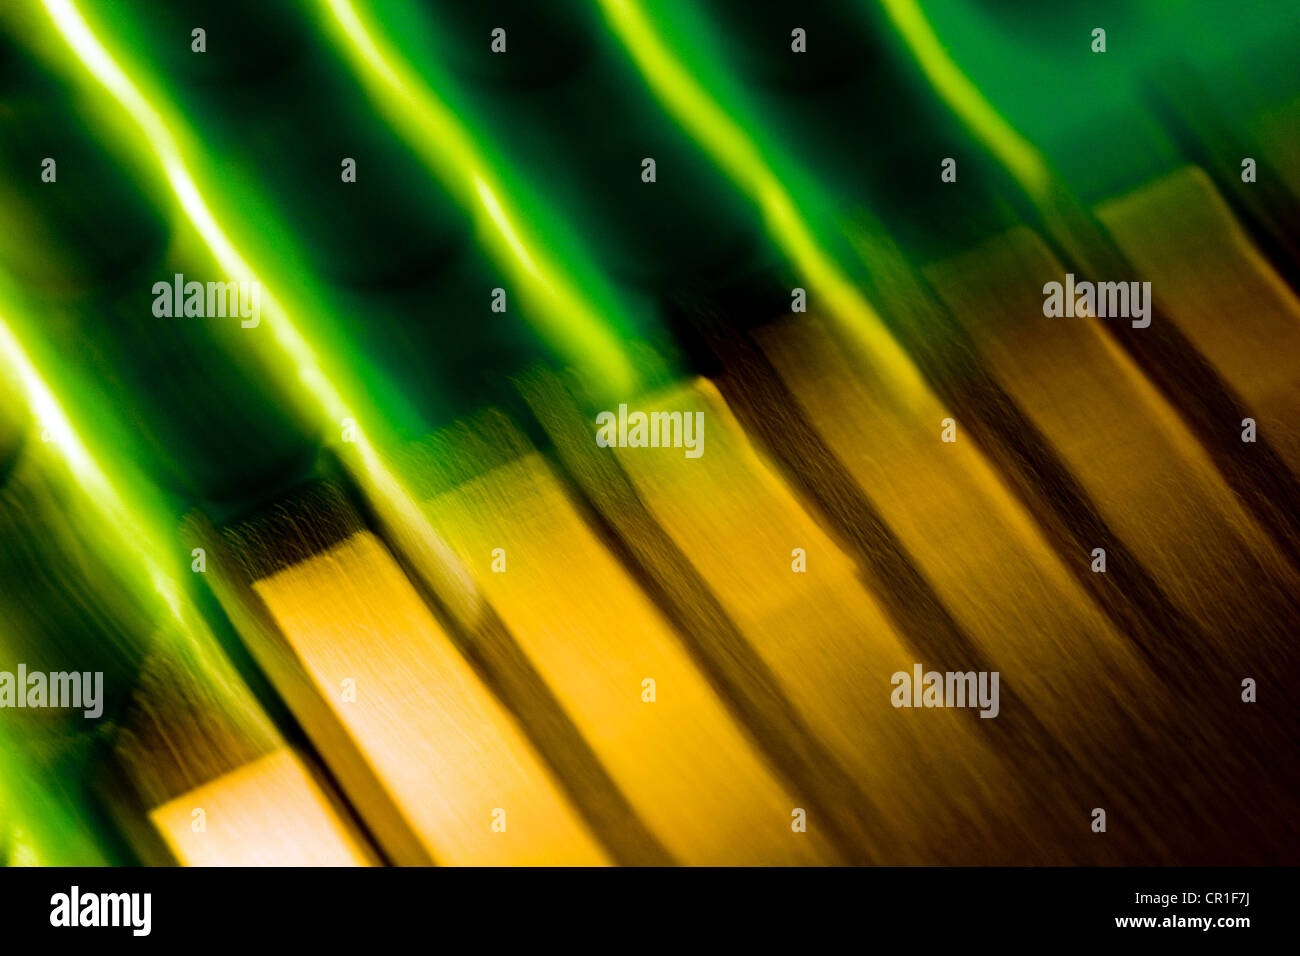 Electronic contacts, abstract image taken with a high magnification macro lens. Stock Photo